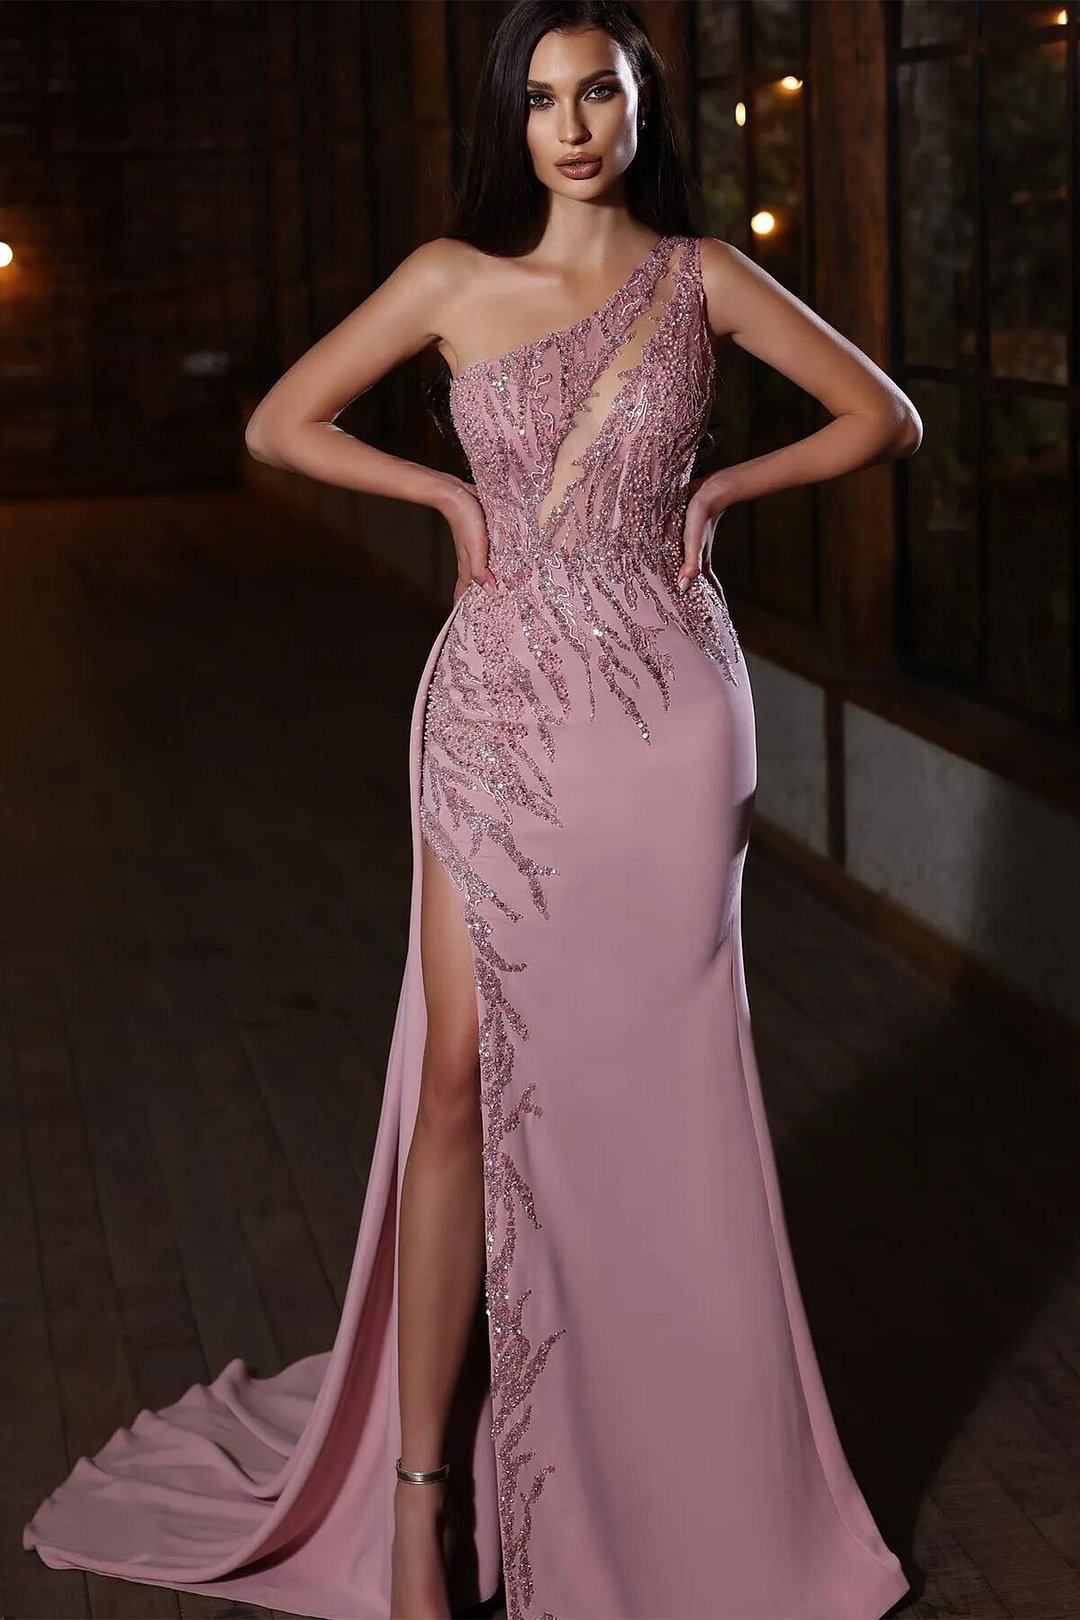 Luluslly One Shoulder Pink Evening Dress Mermaid Long Slit WIth Beads Sequins